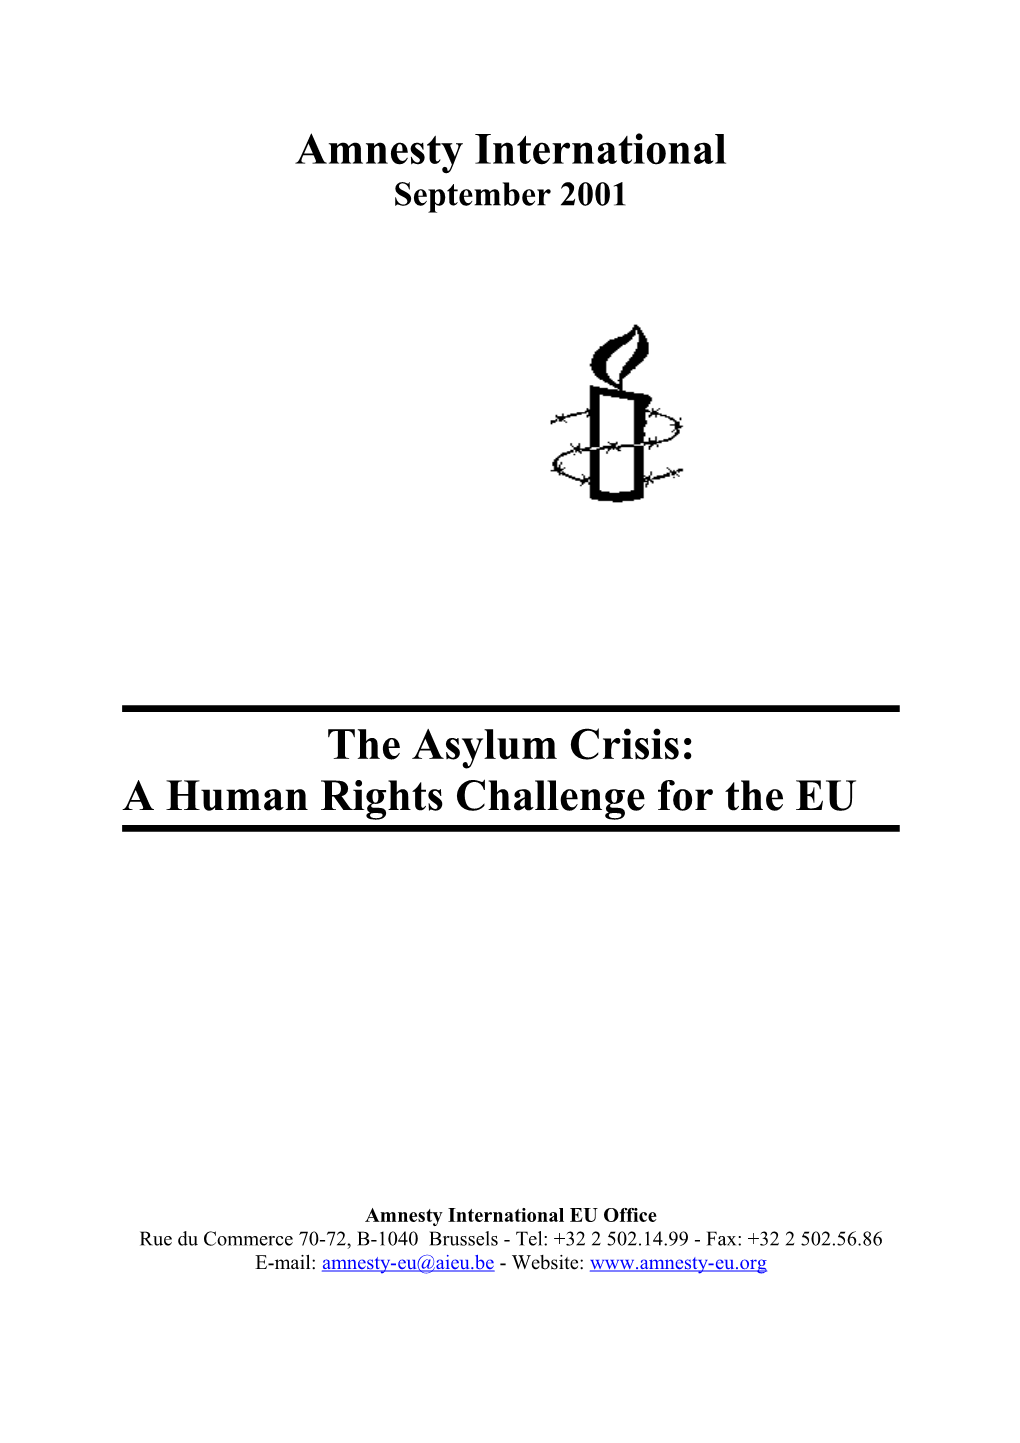 The Asylum Crisis: a Human Rights Challenge for the EU